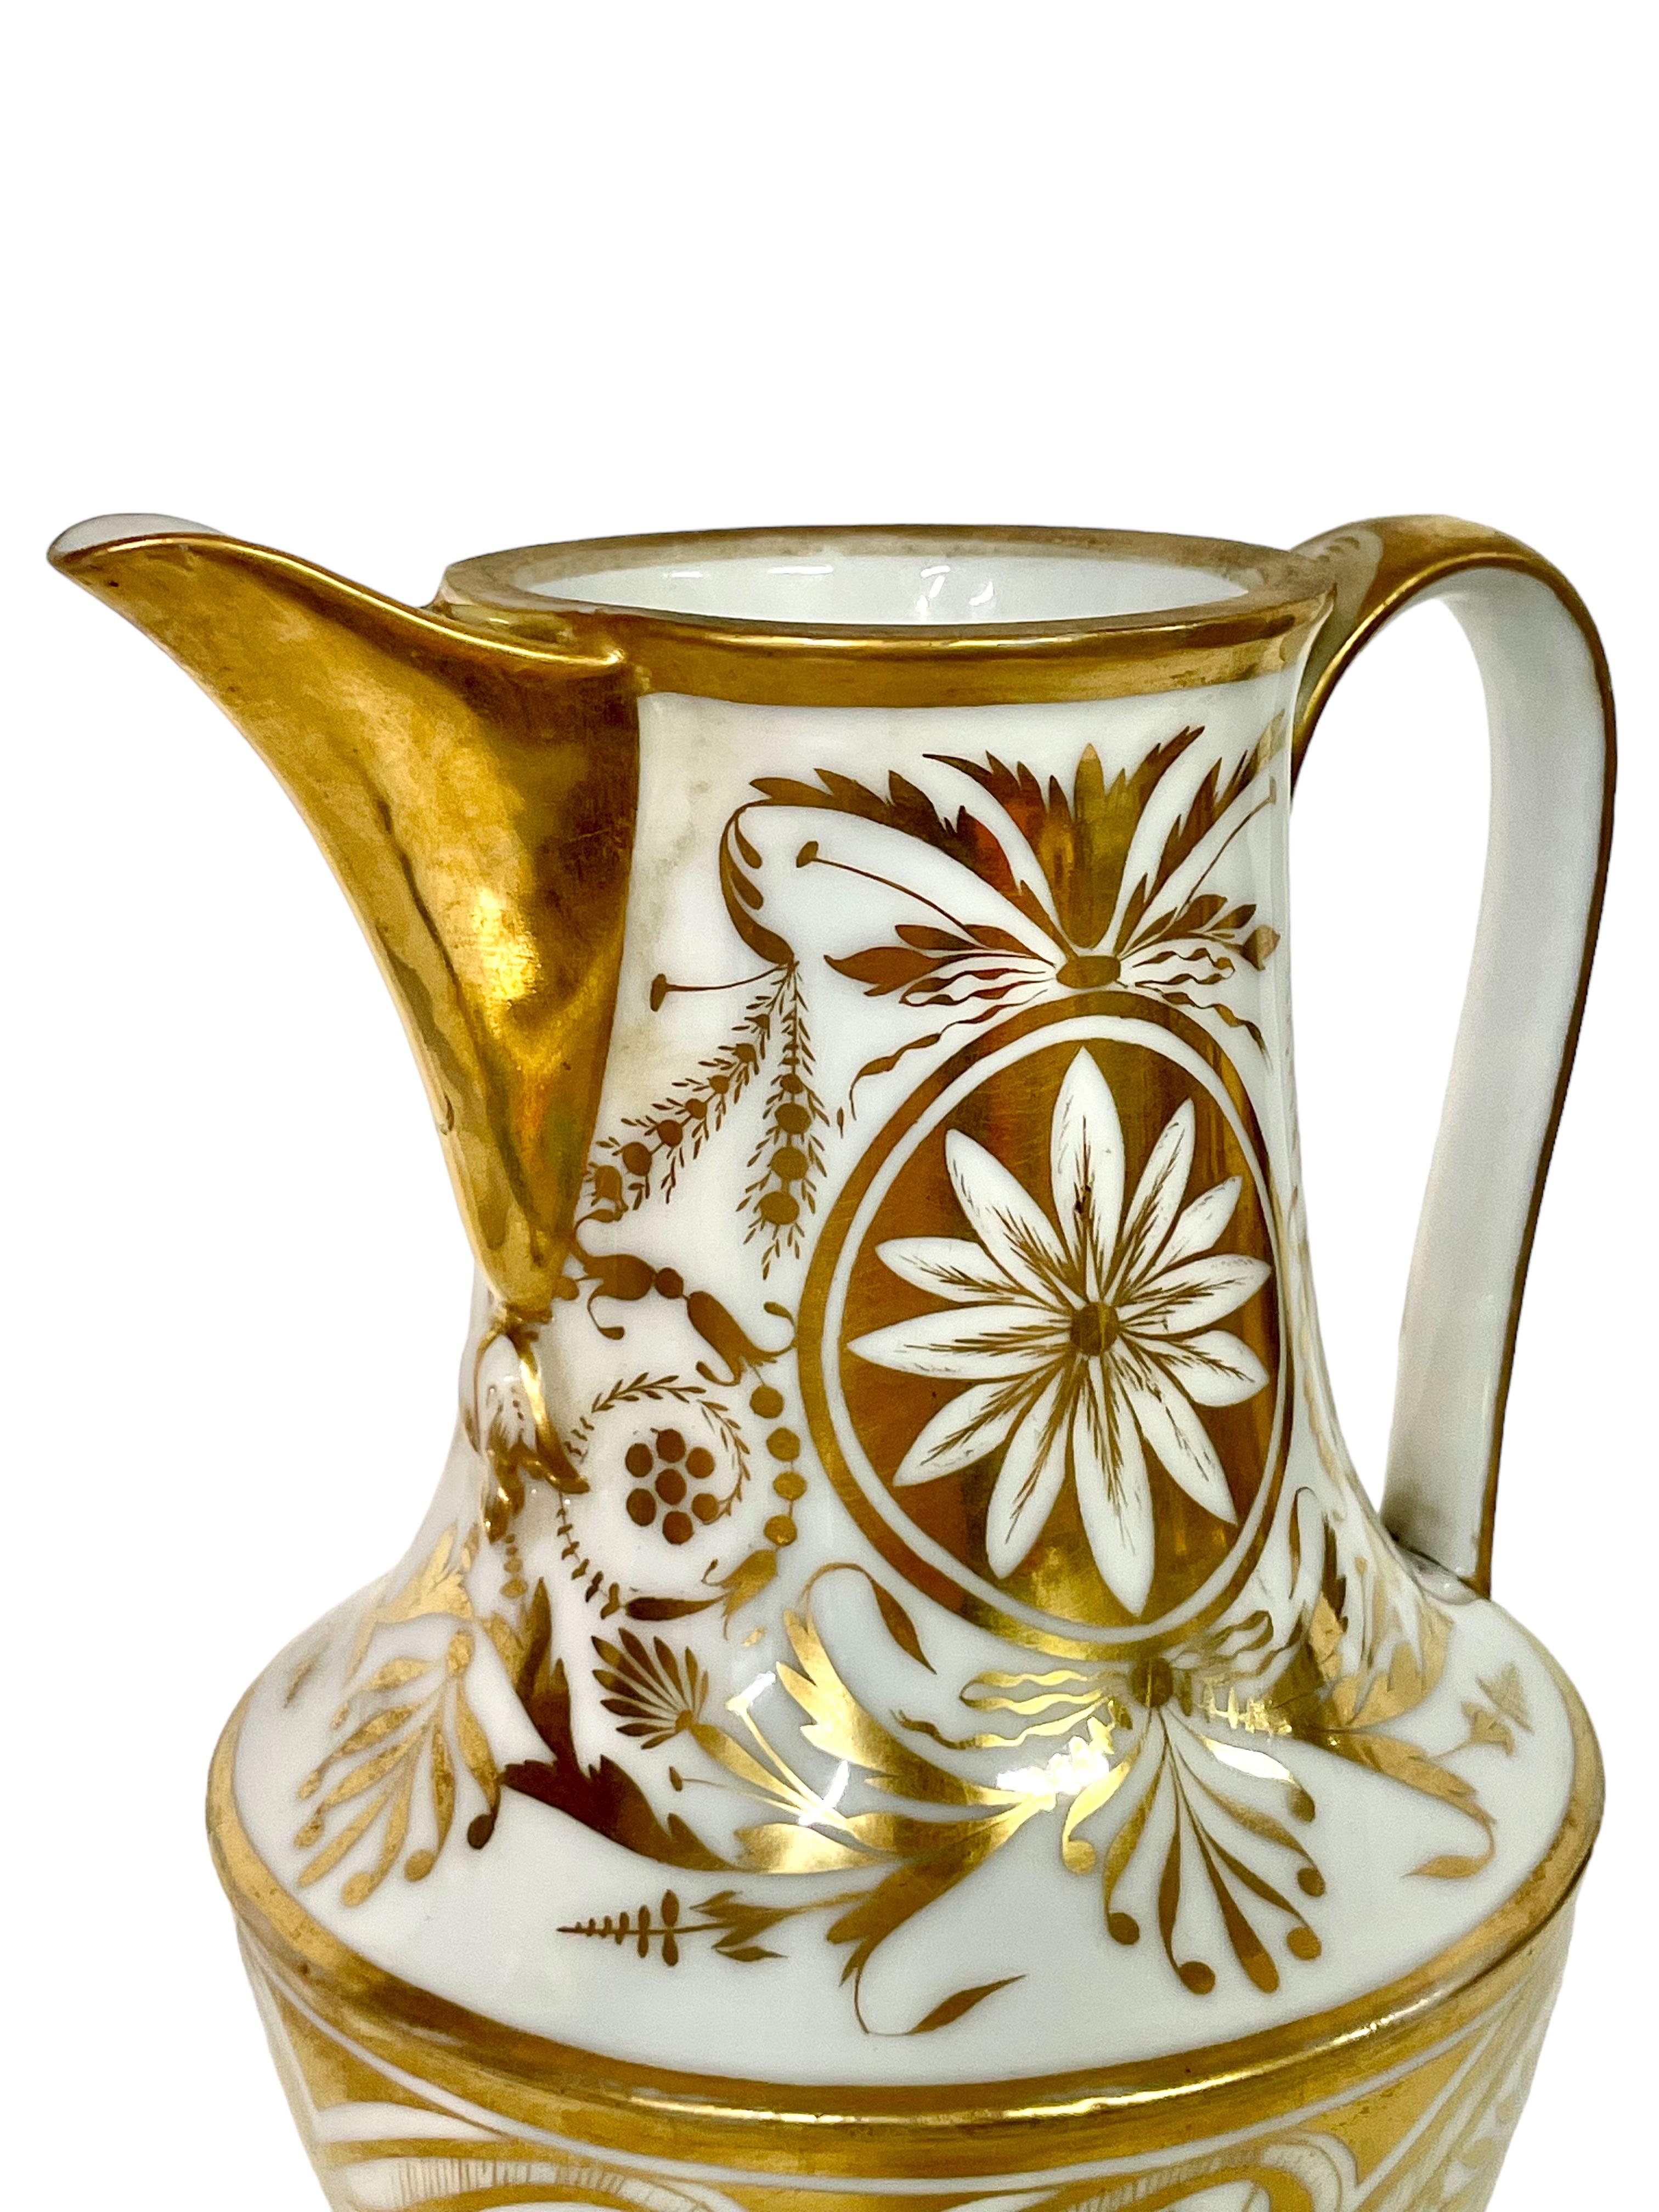 A superb early 19th century Empire period water pitcher in Porcelain de Paris and finely embellished with gilt in a striking, hand-painted design of flowers, leaves and other decorative motifs typical of the period. The upper rim, spout and handle